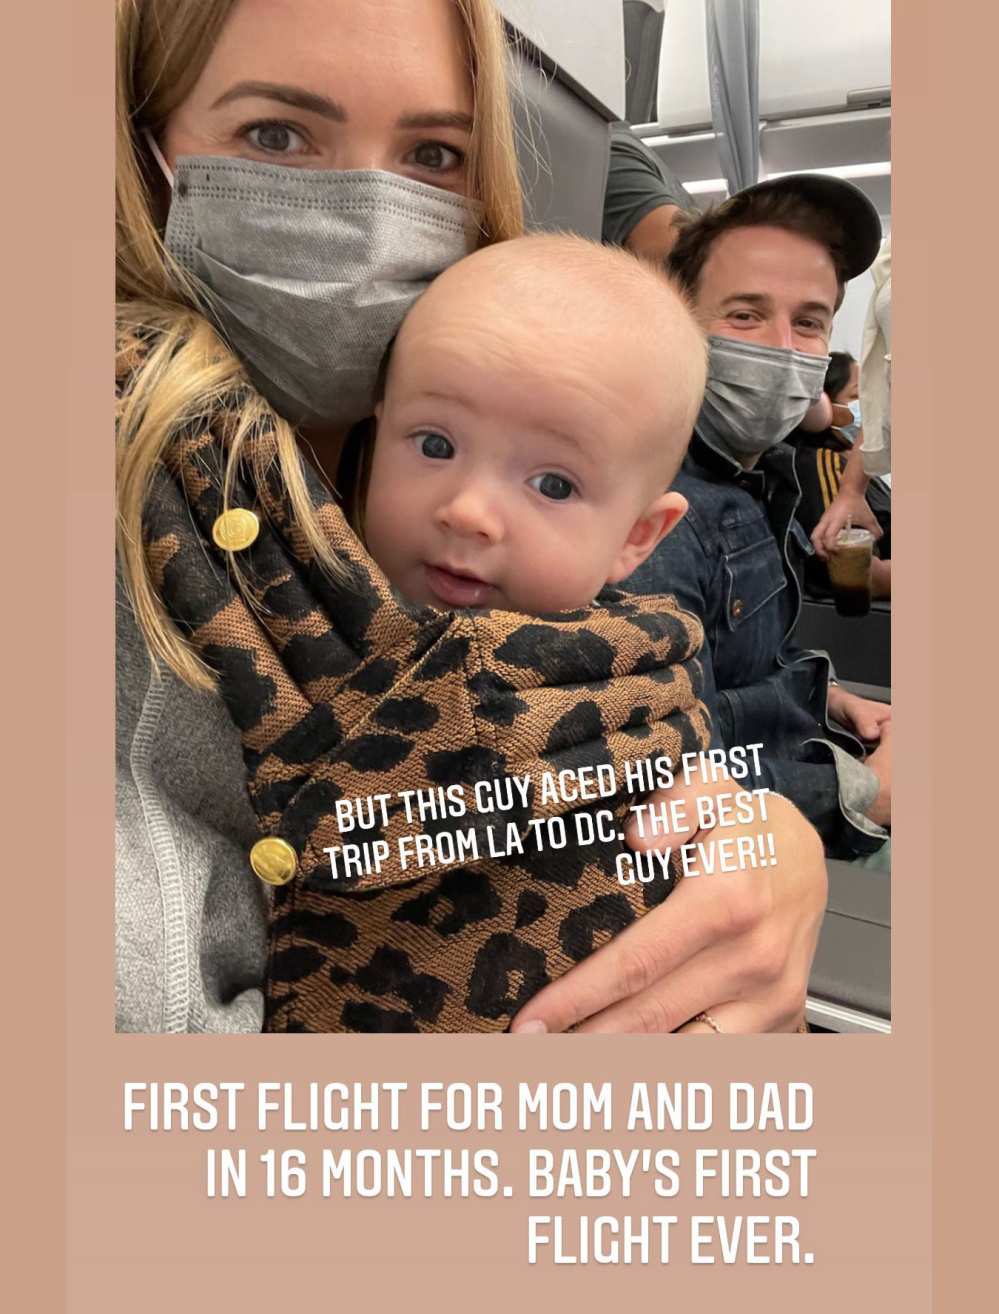 Mandy Moore Asks for ‘Help’ Amid Canceled Flight, Says Son Gus Is ‘Freaking Out'